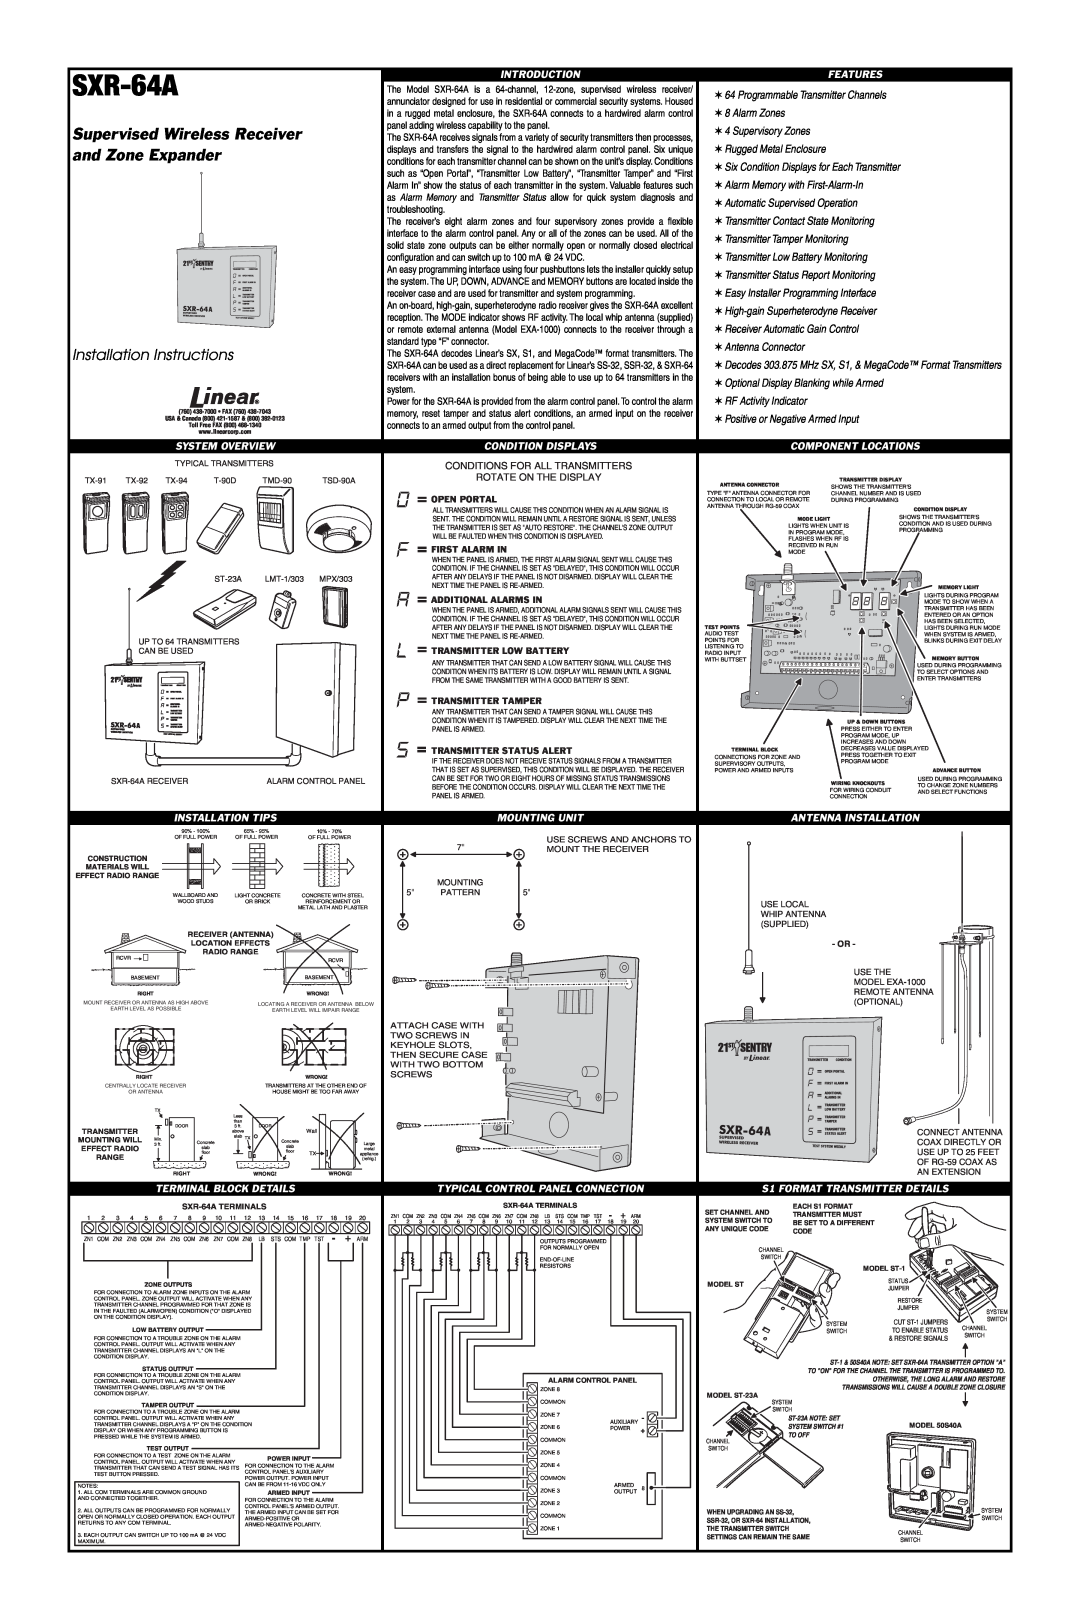 Linear SXR-64A installation instructions Supervised Wireless Receiver, and Zone Expander, Installation Instructions 